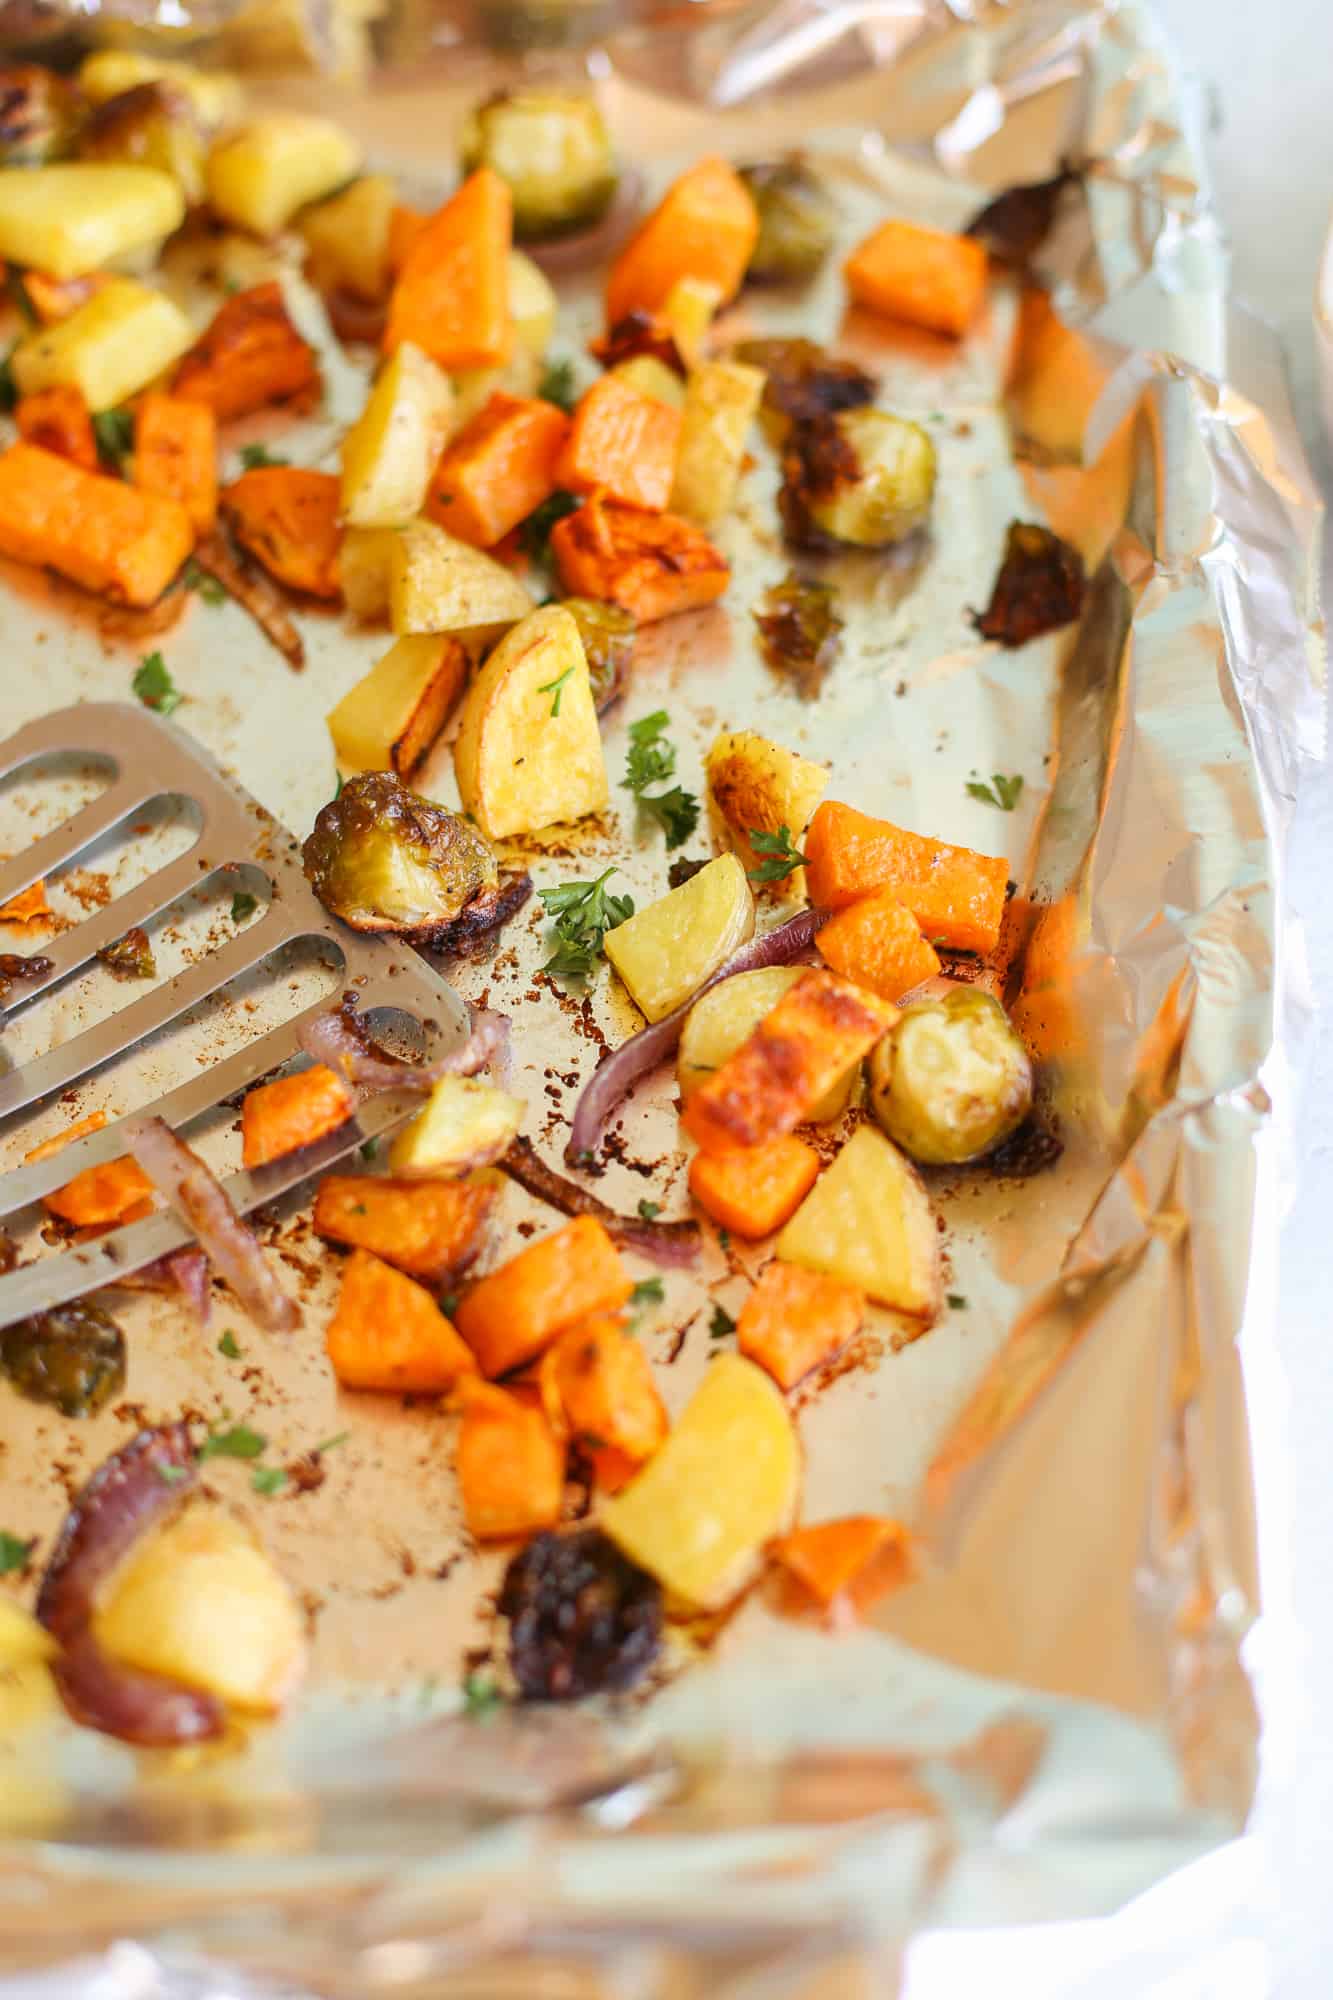 Roasted vegetables on a foil-lined baking sheet with a spatula.